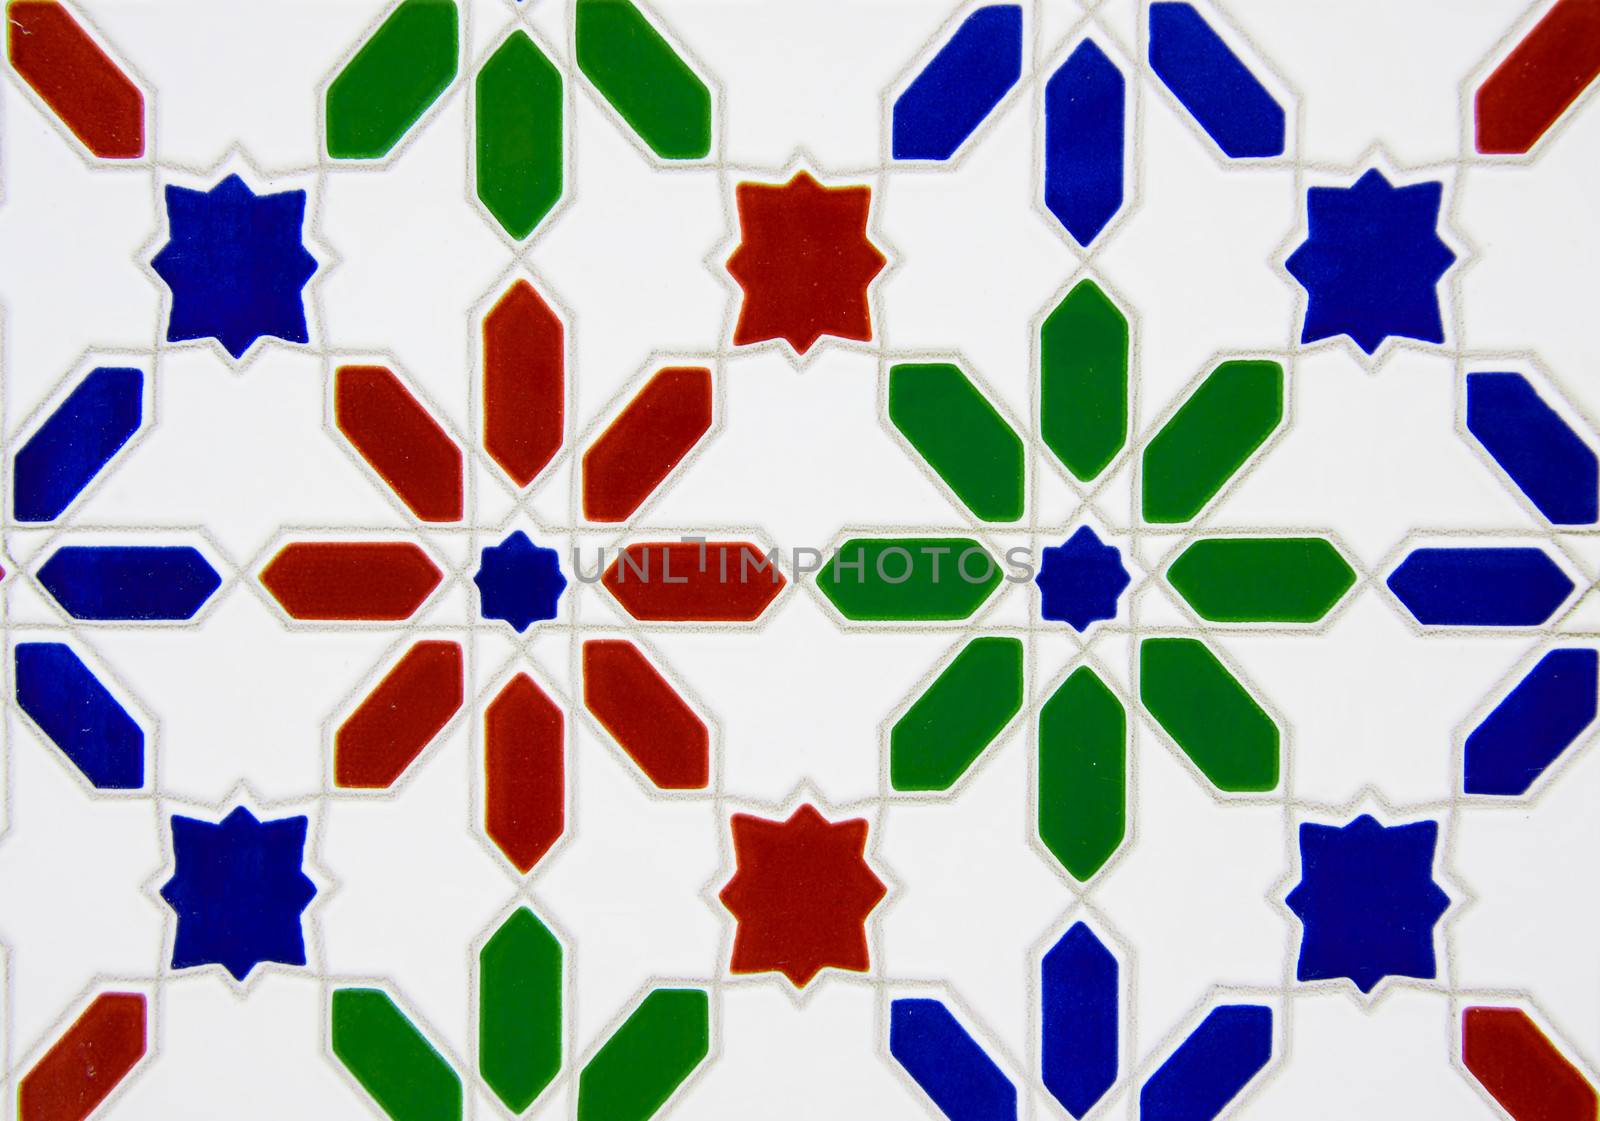 Spanish tile by GryT